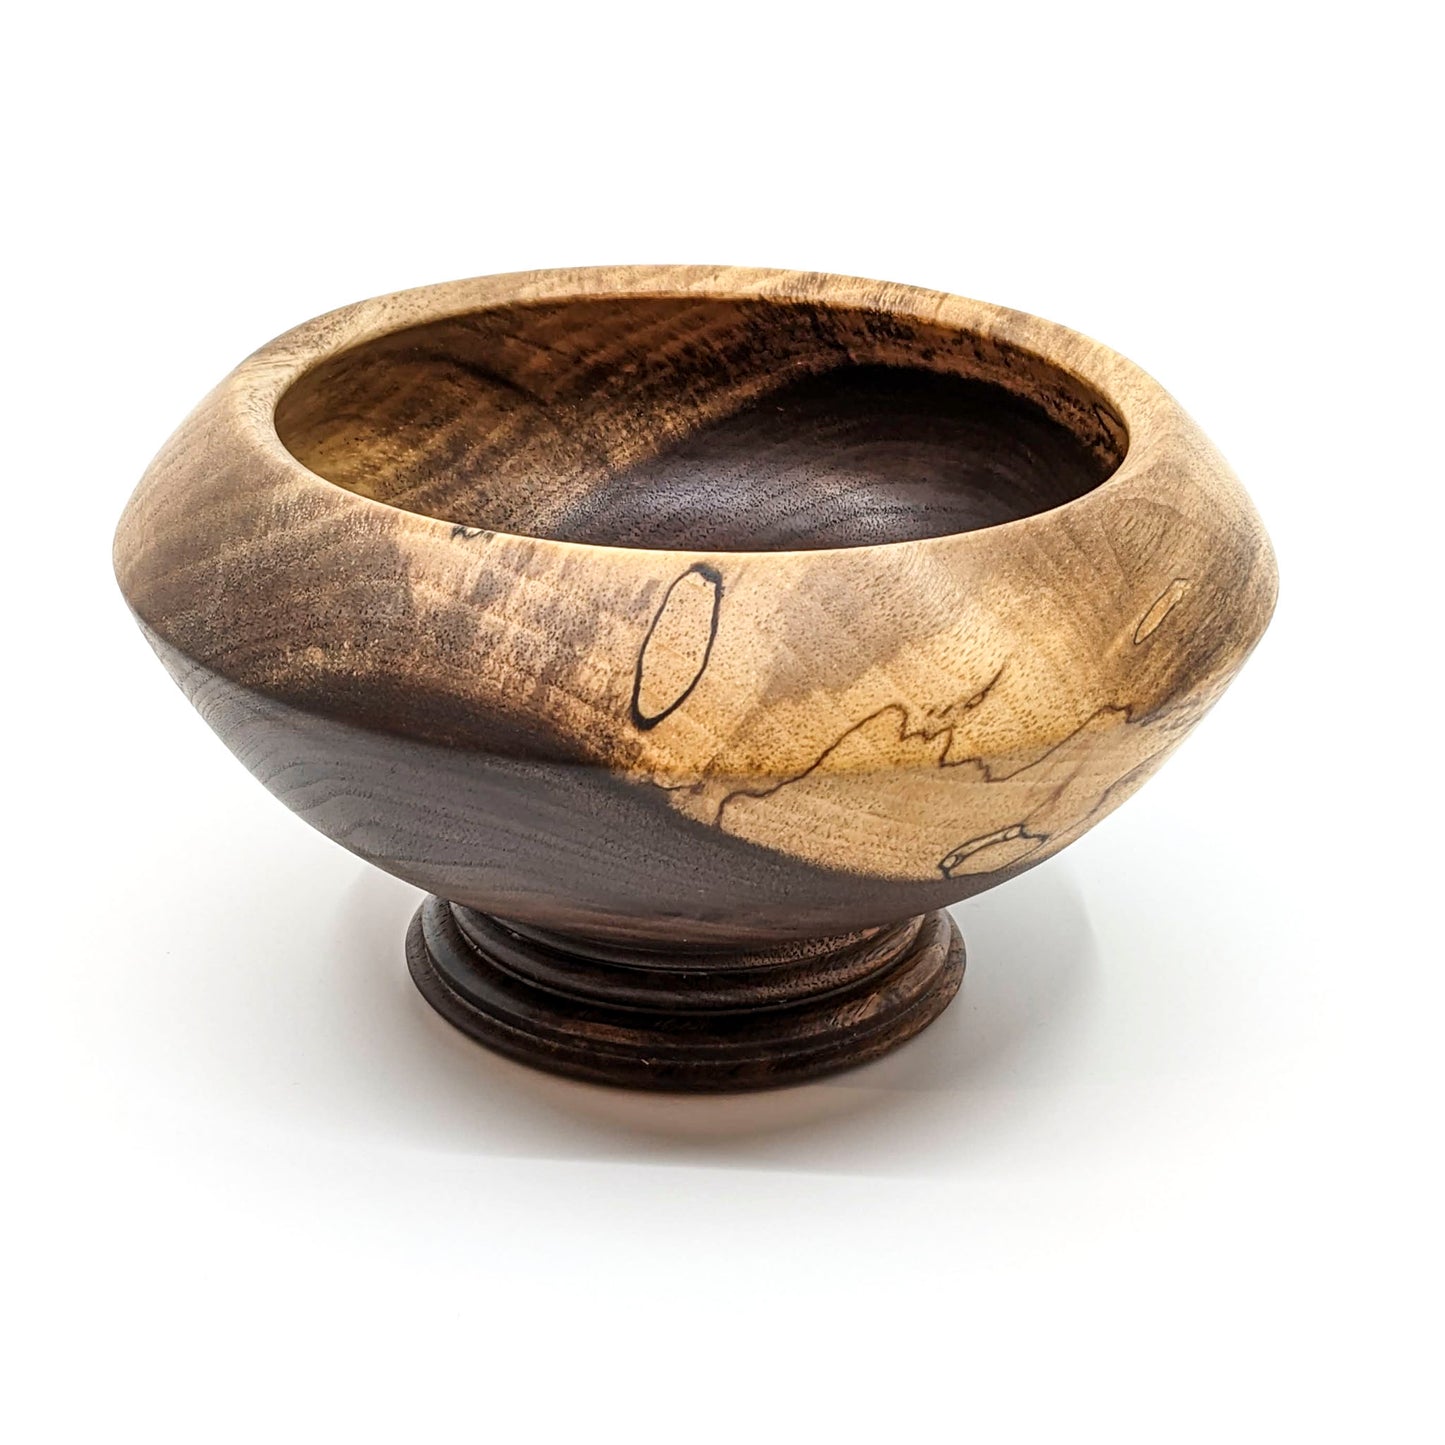 Footed Bowl in Walnut